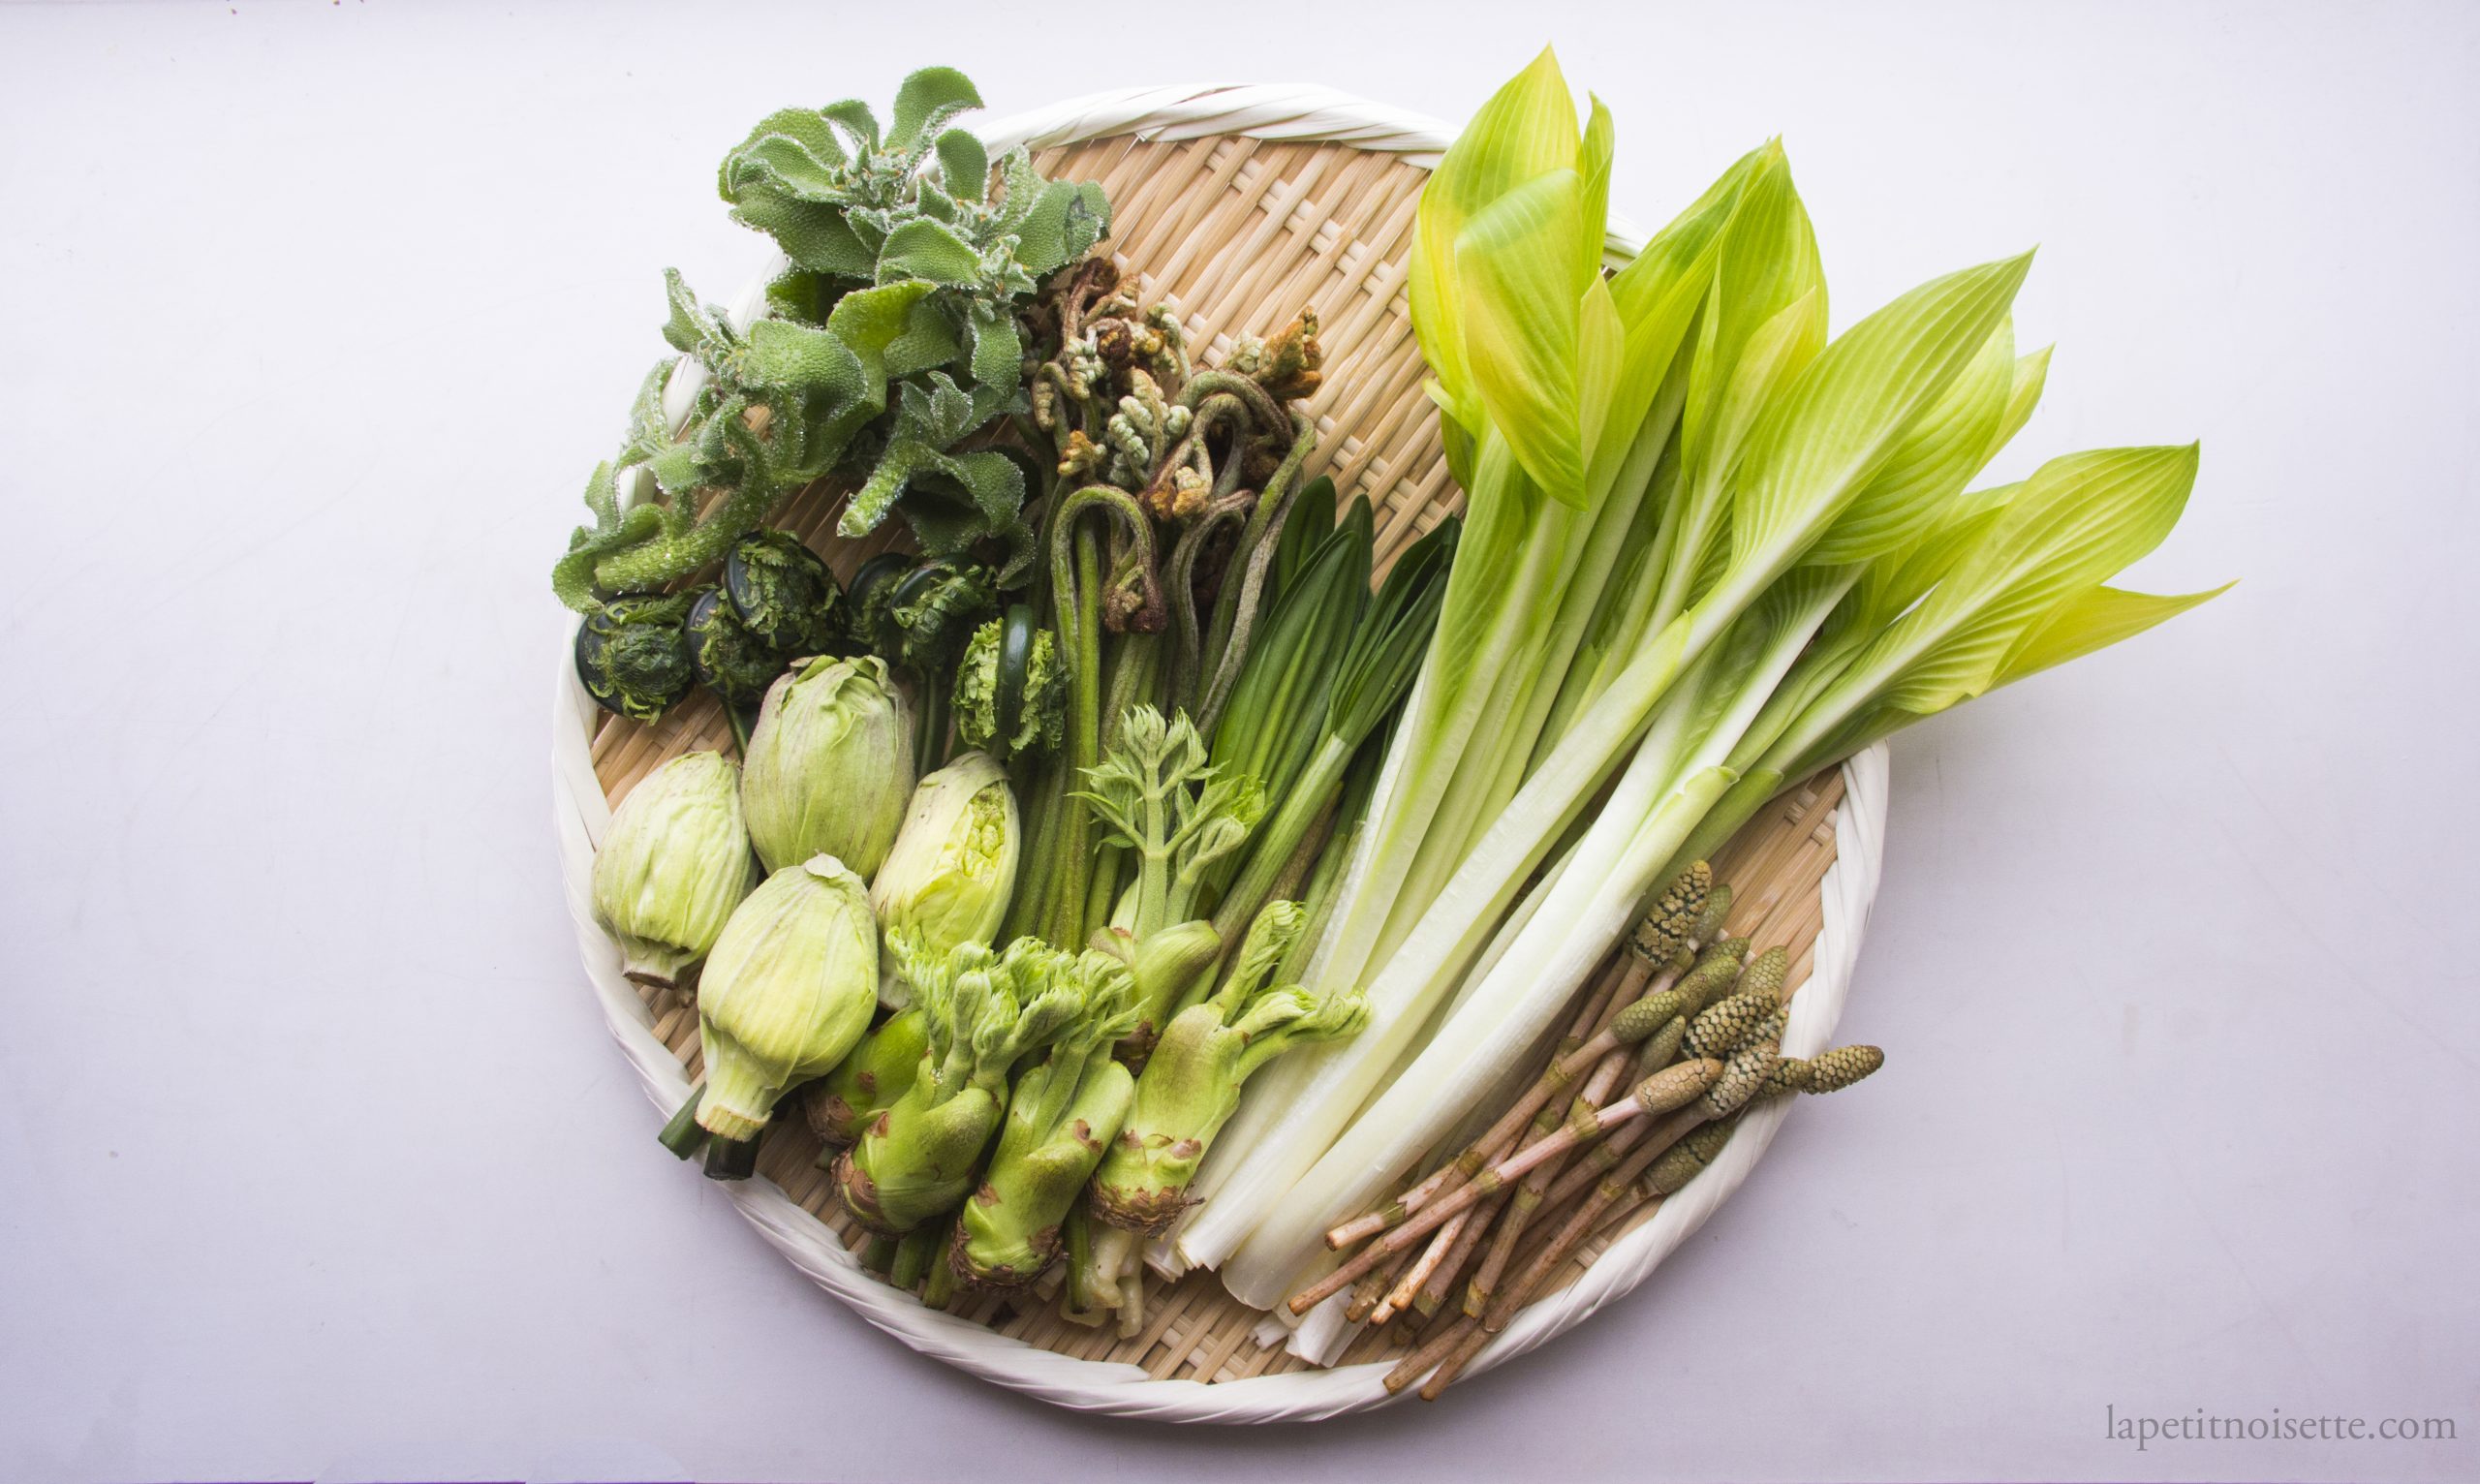 A collection of different Japanese mountain vegetables.